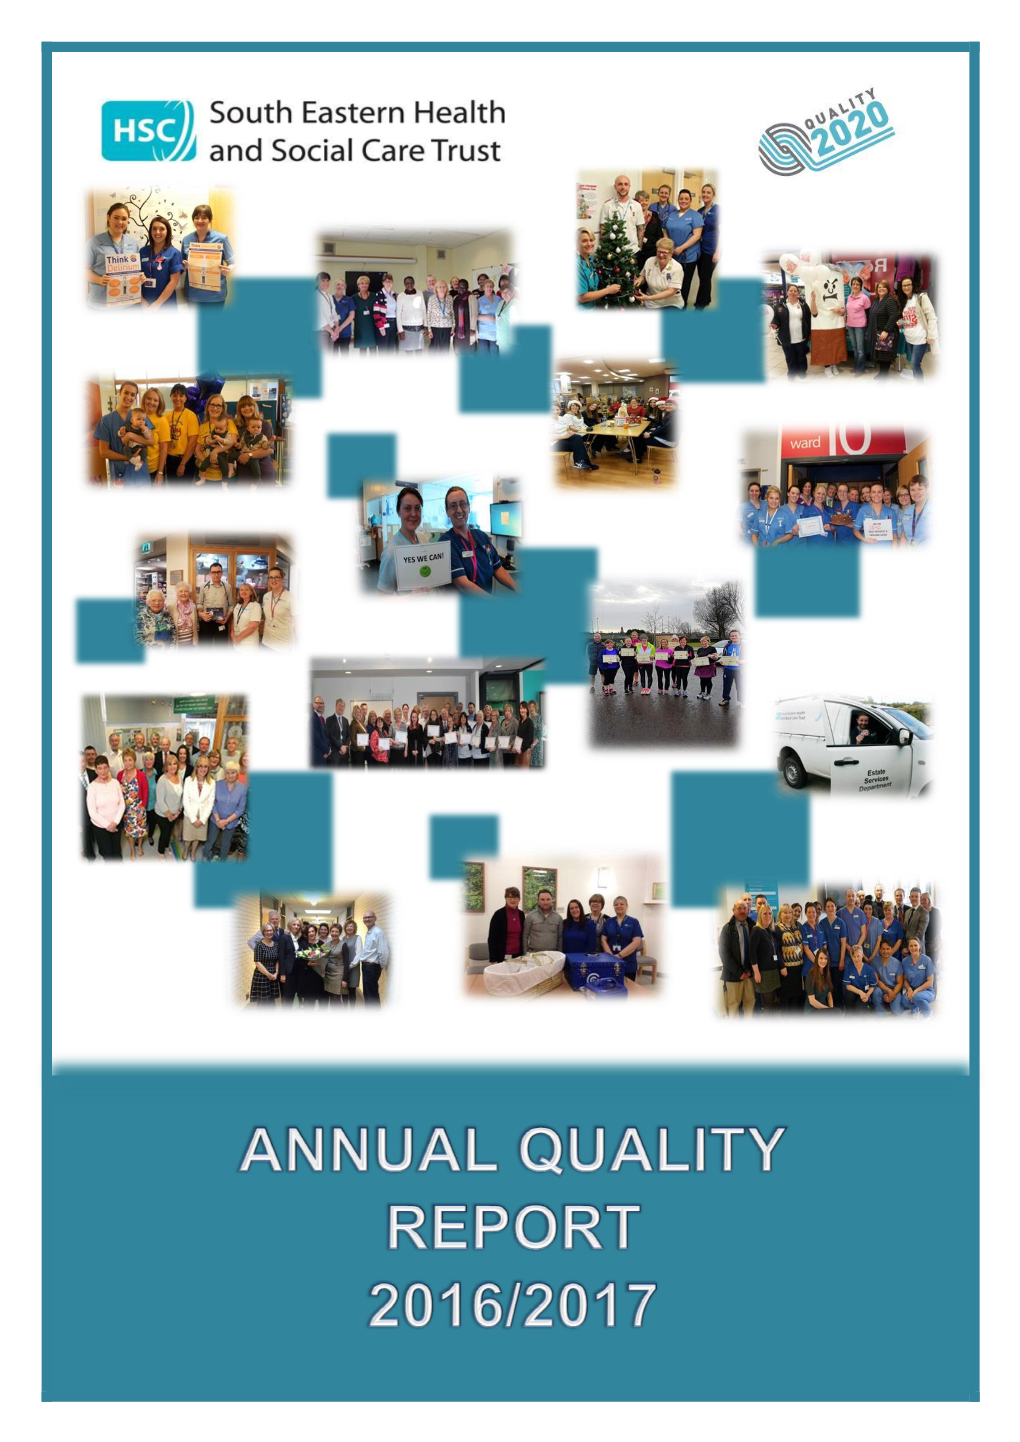 Annual Report 2016/2017 Will Contain a Summary of The